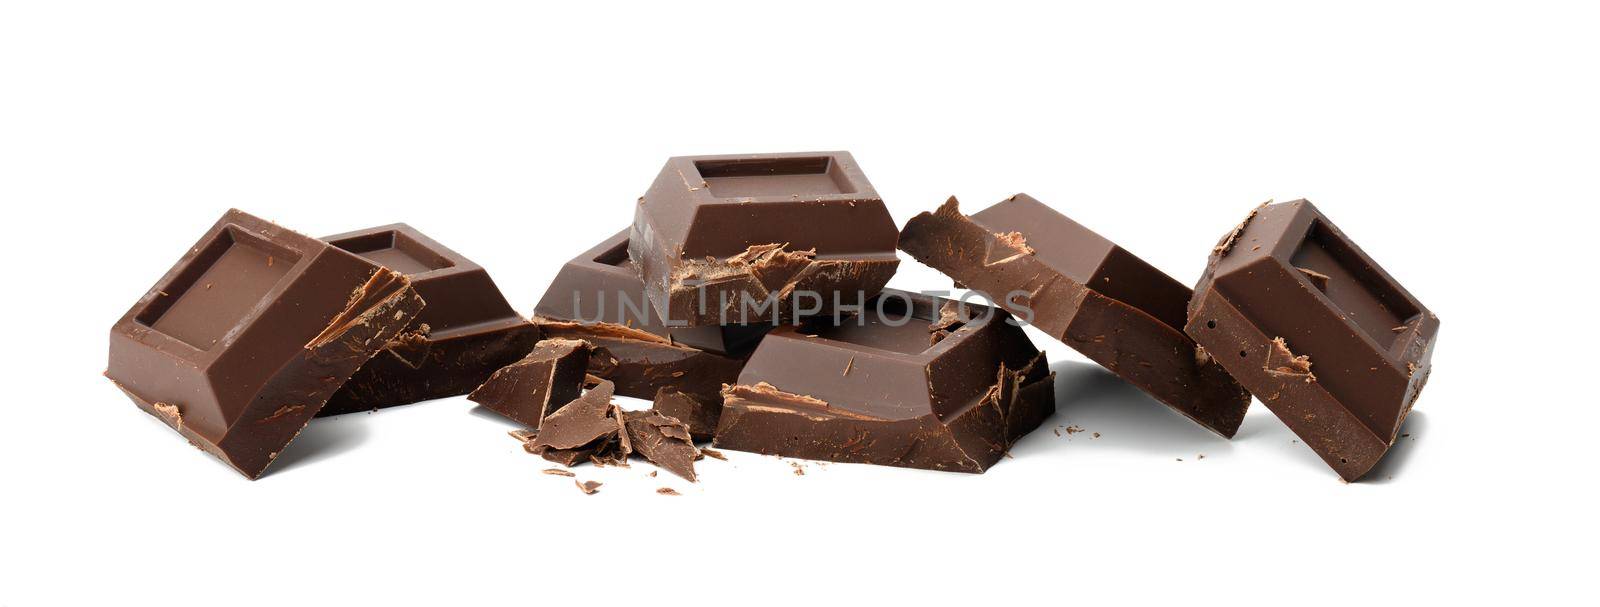 broken black chocolate with pieces isolated on white background. Dessert bar of chocolate, close up